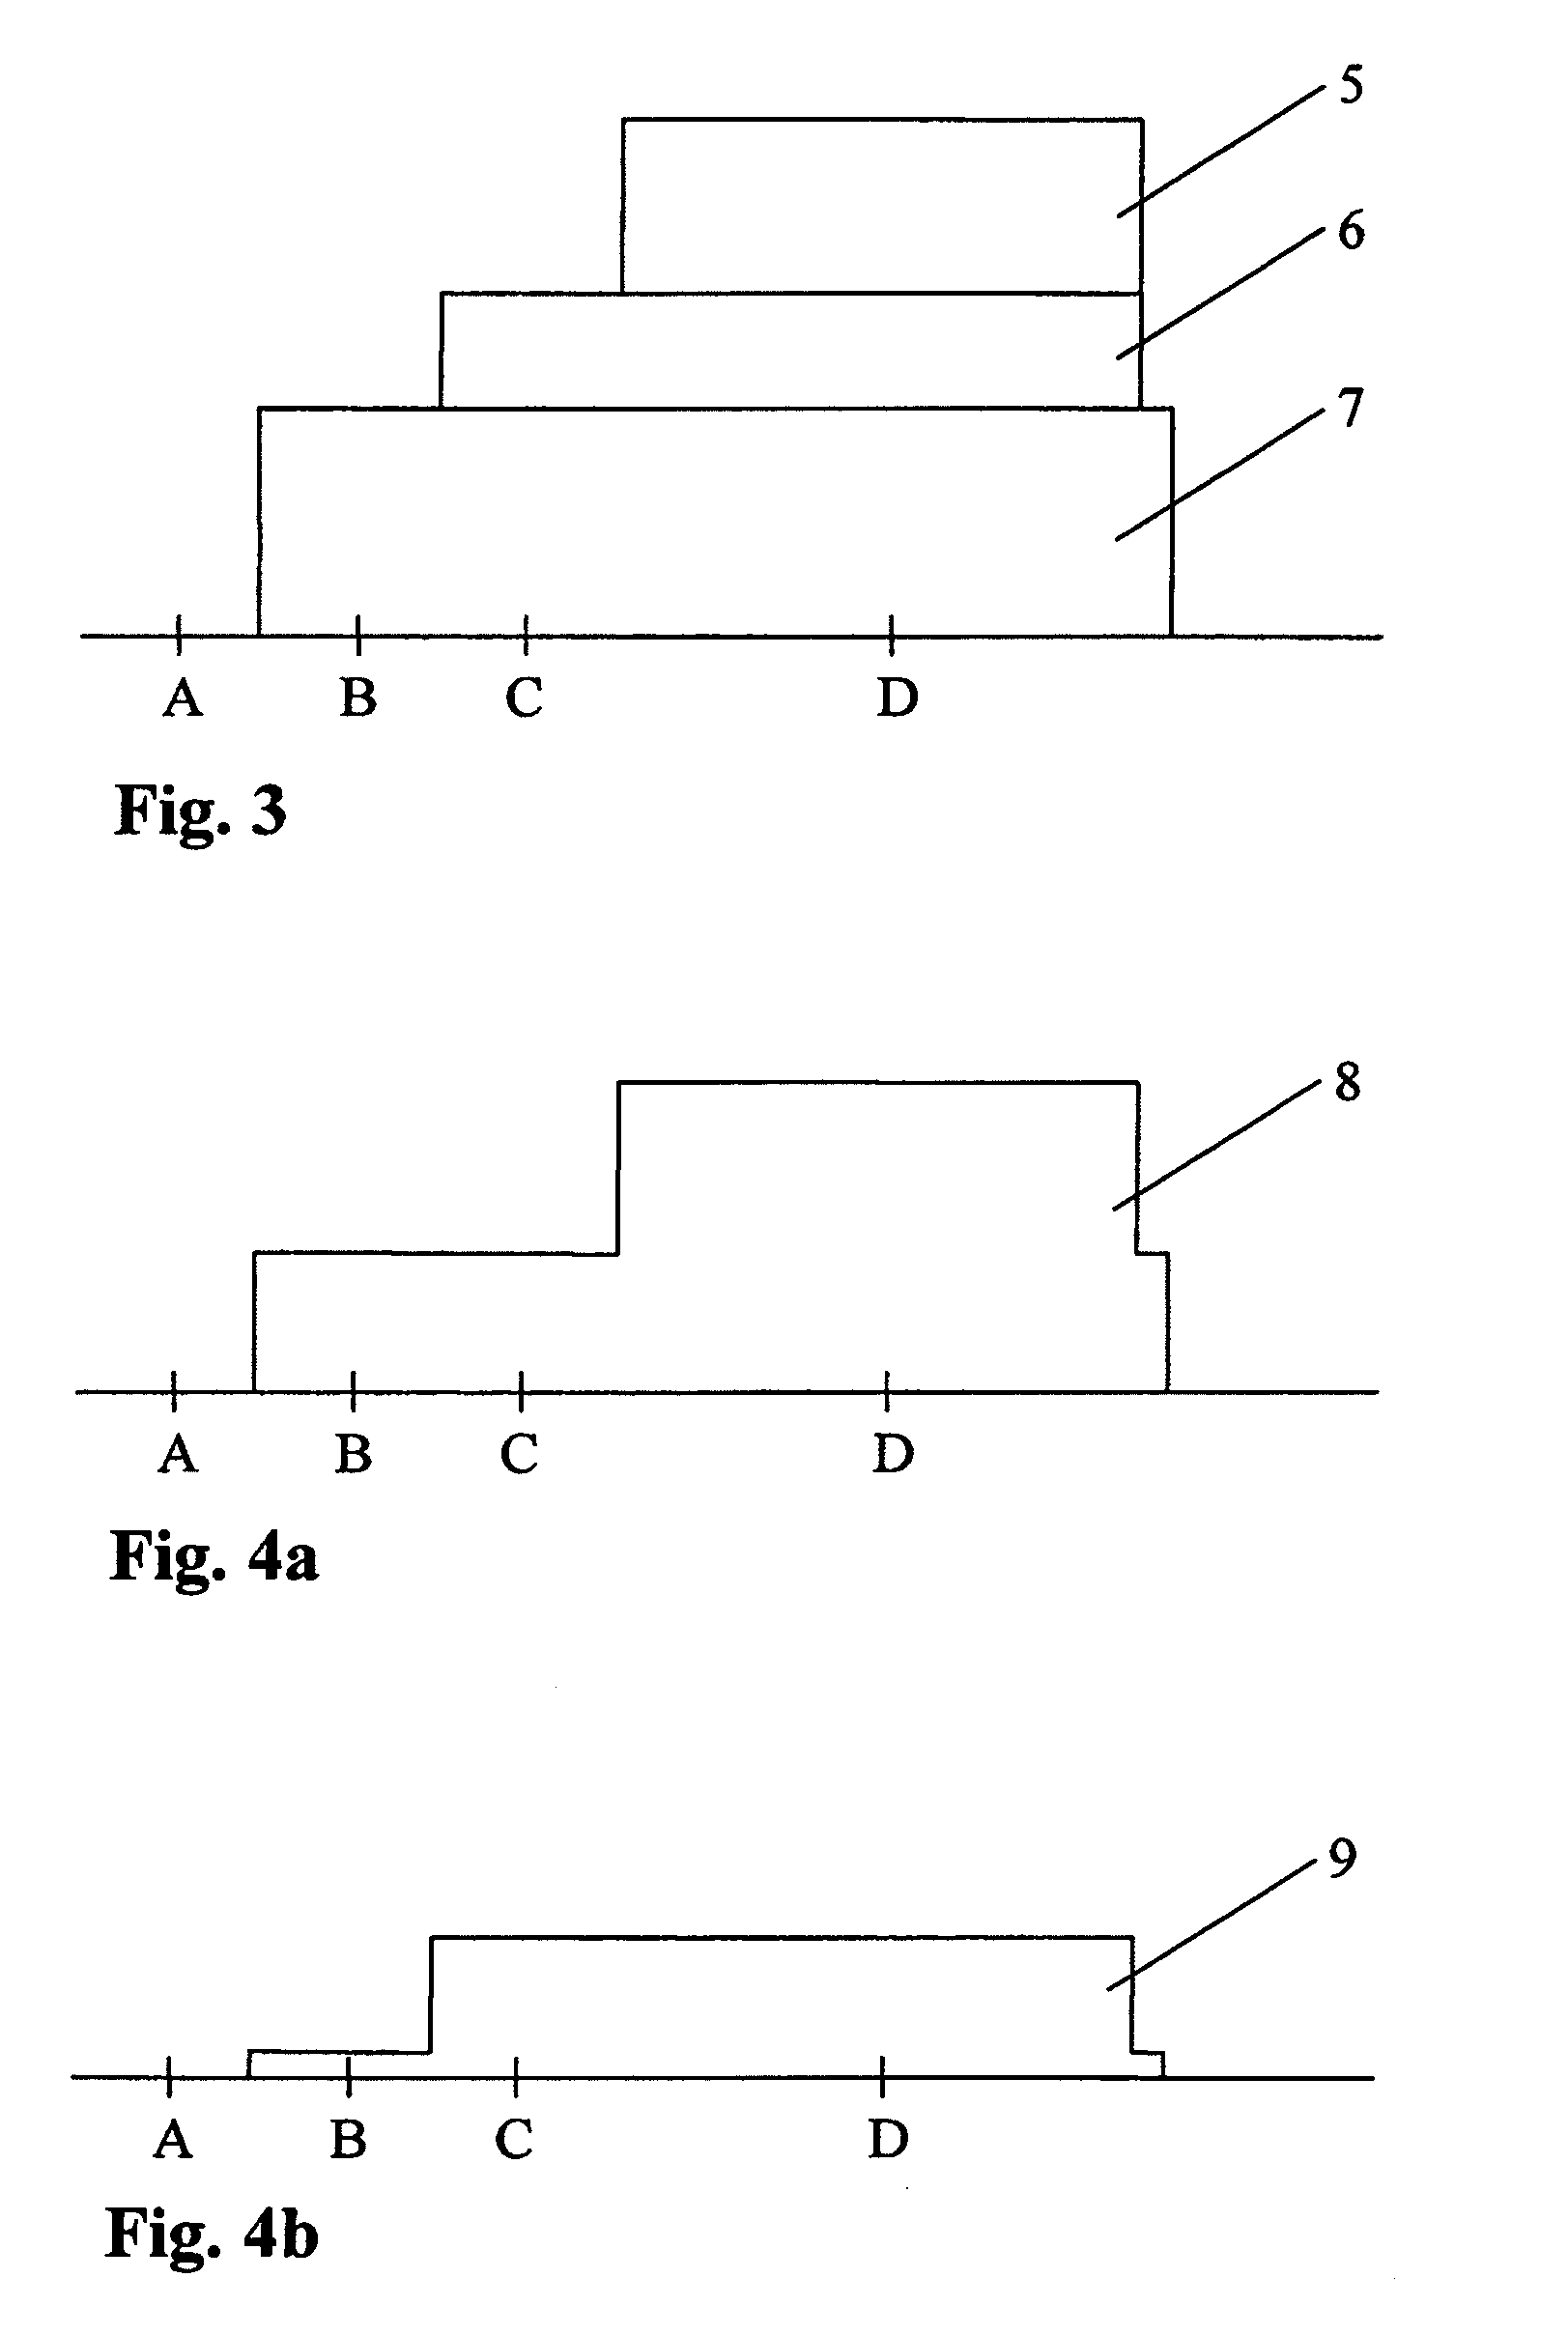 Method for improving the ability to recognize materials in an X-ray inspection system, and X-ray inspection system